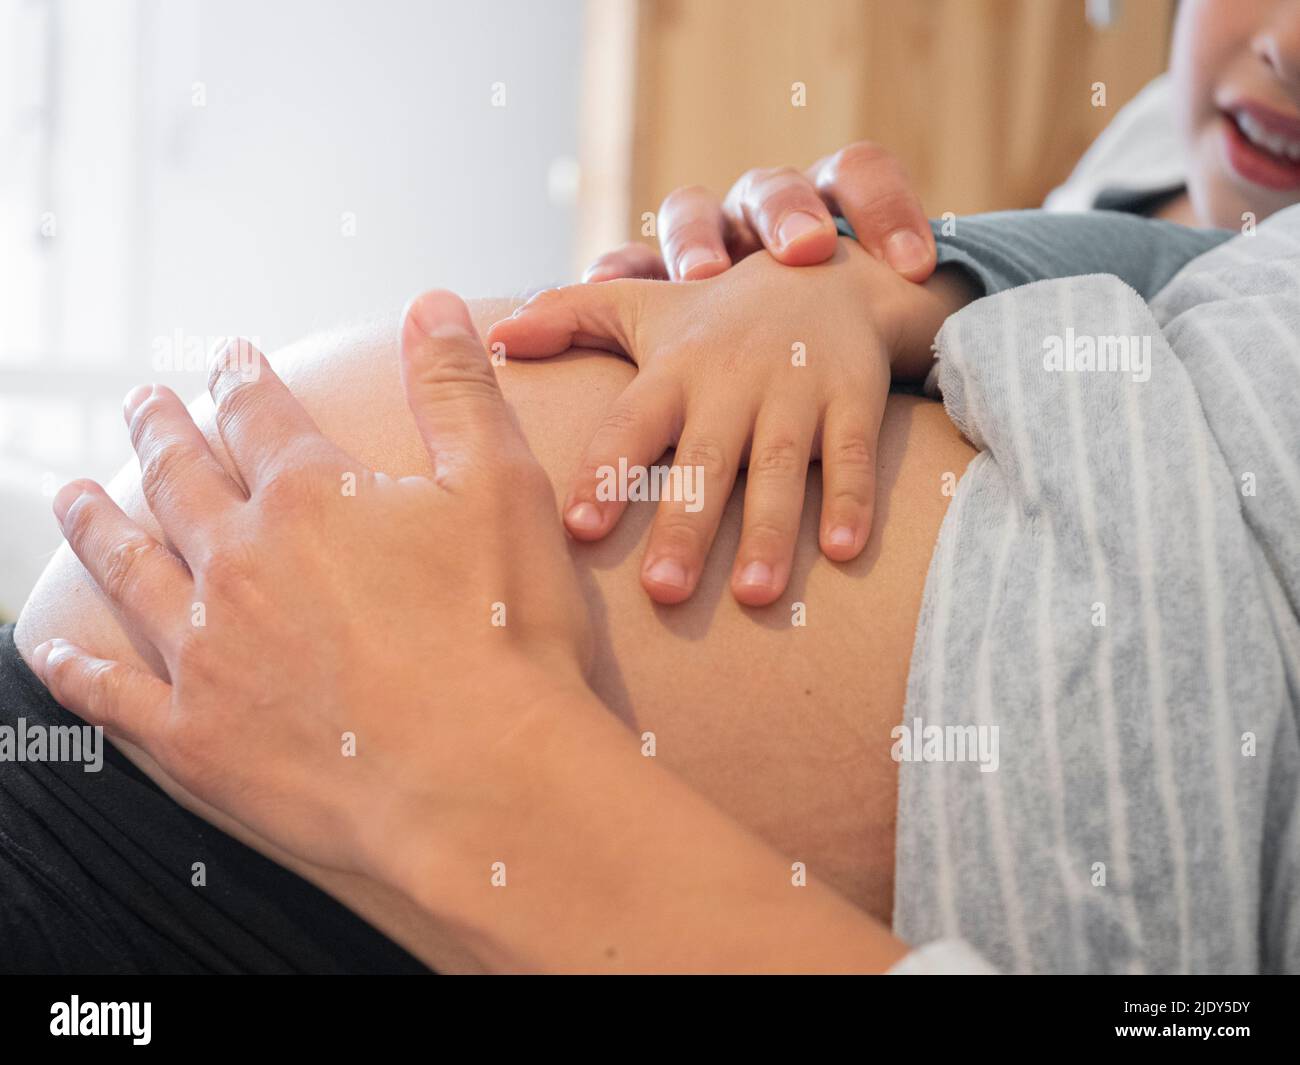 Child touching his pregnant mother's tummy Stock Photo